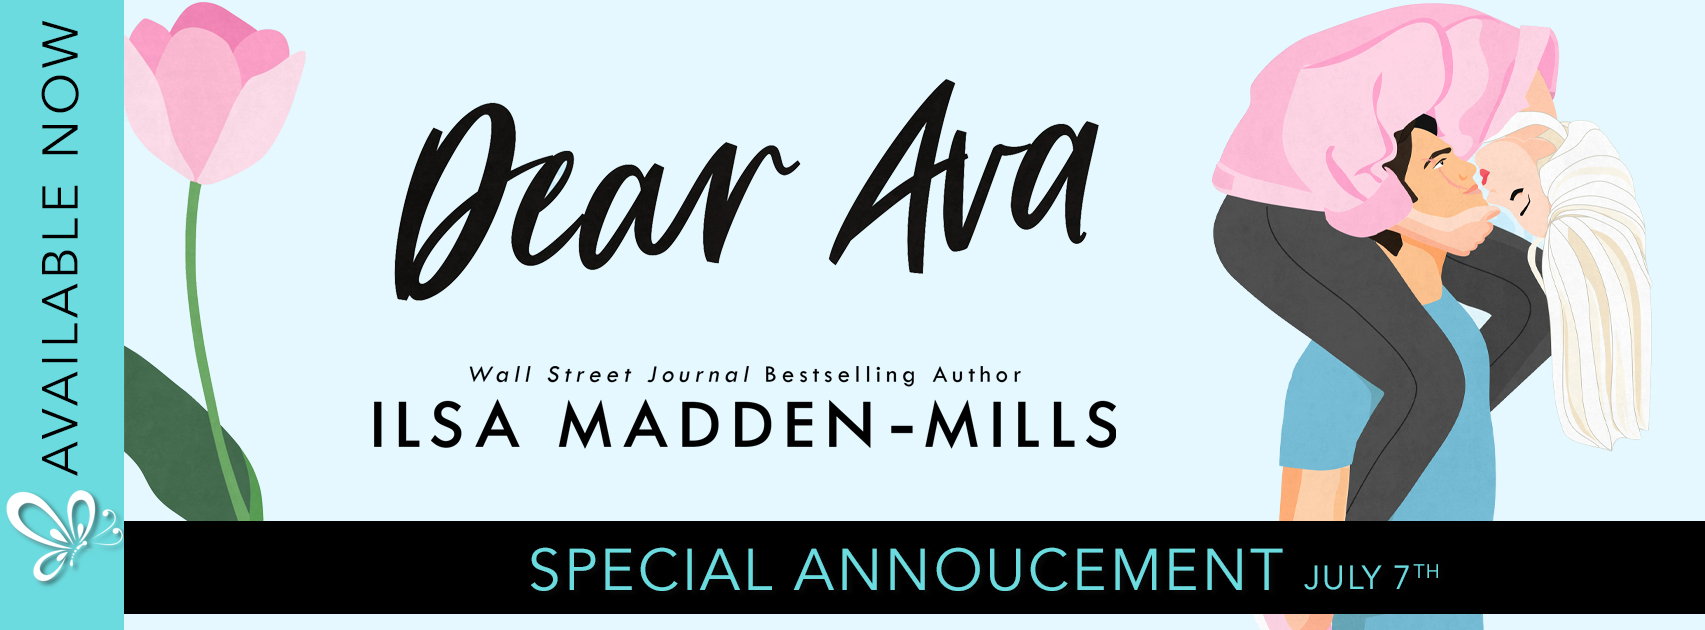 SUPRISE: Dear Ava by Ilsa Madden-Mills is getting a special new cover!